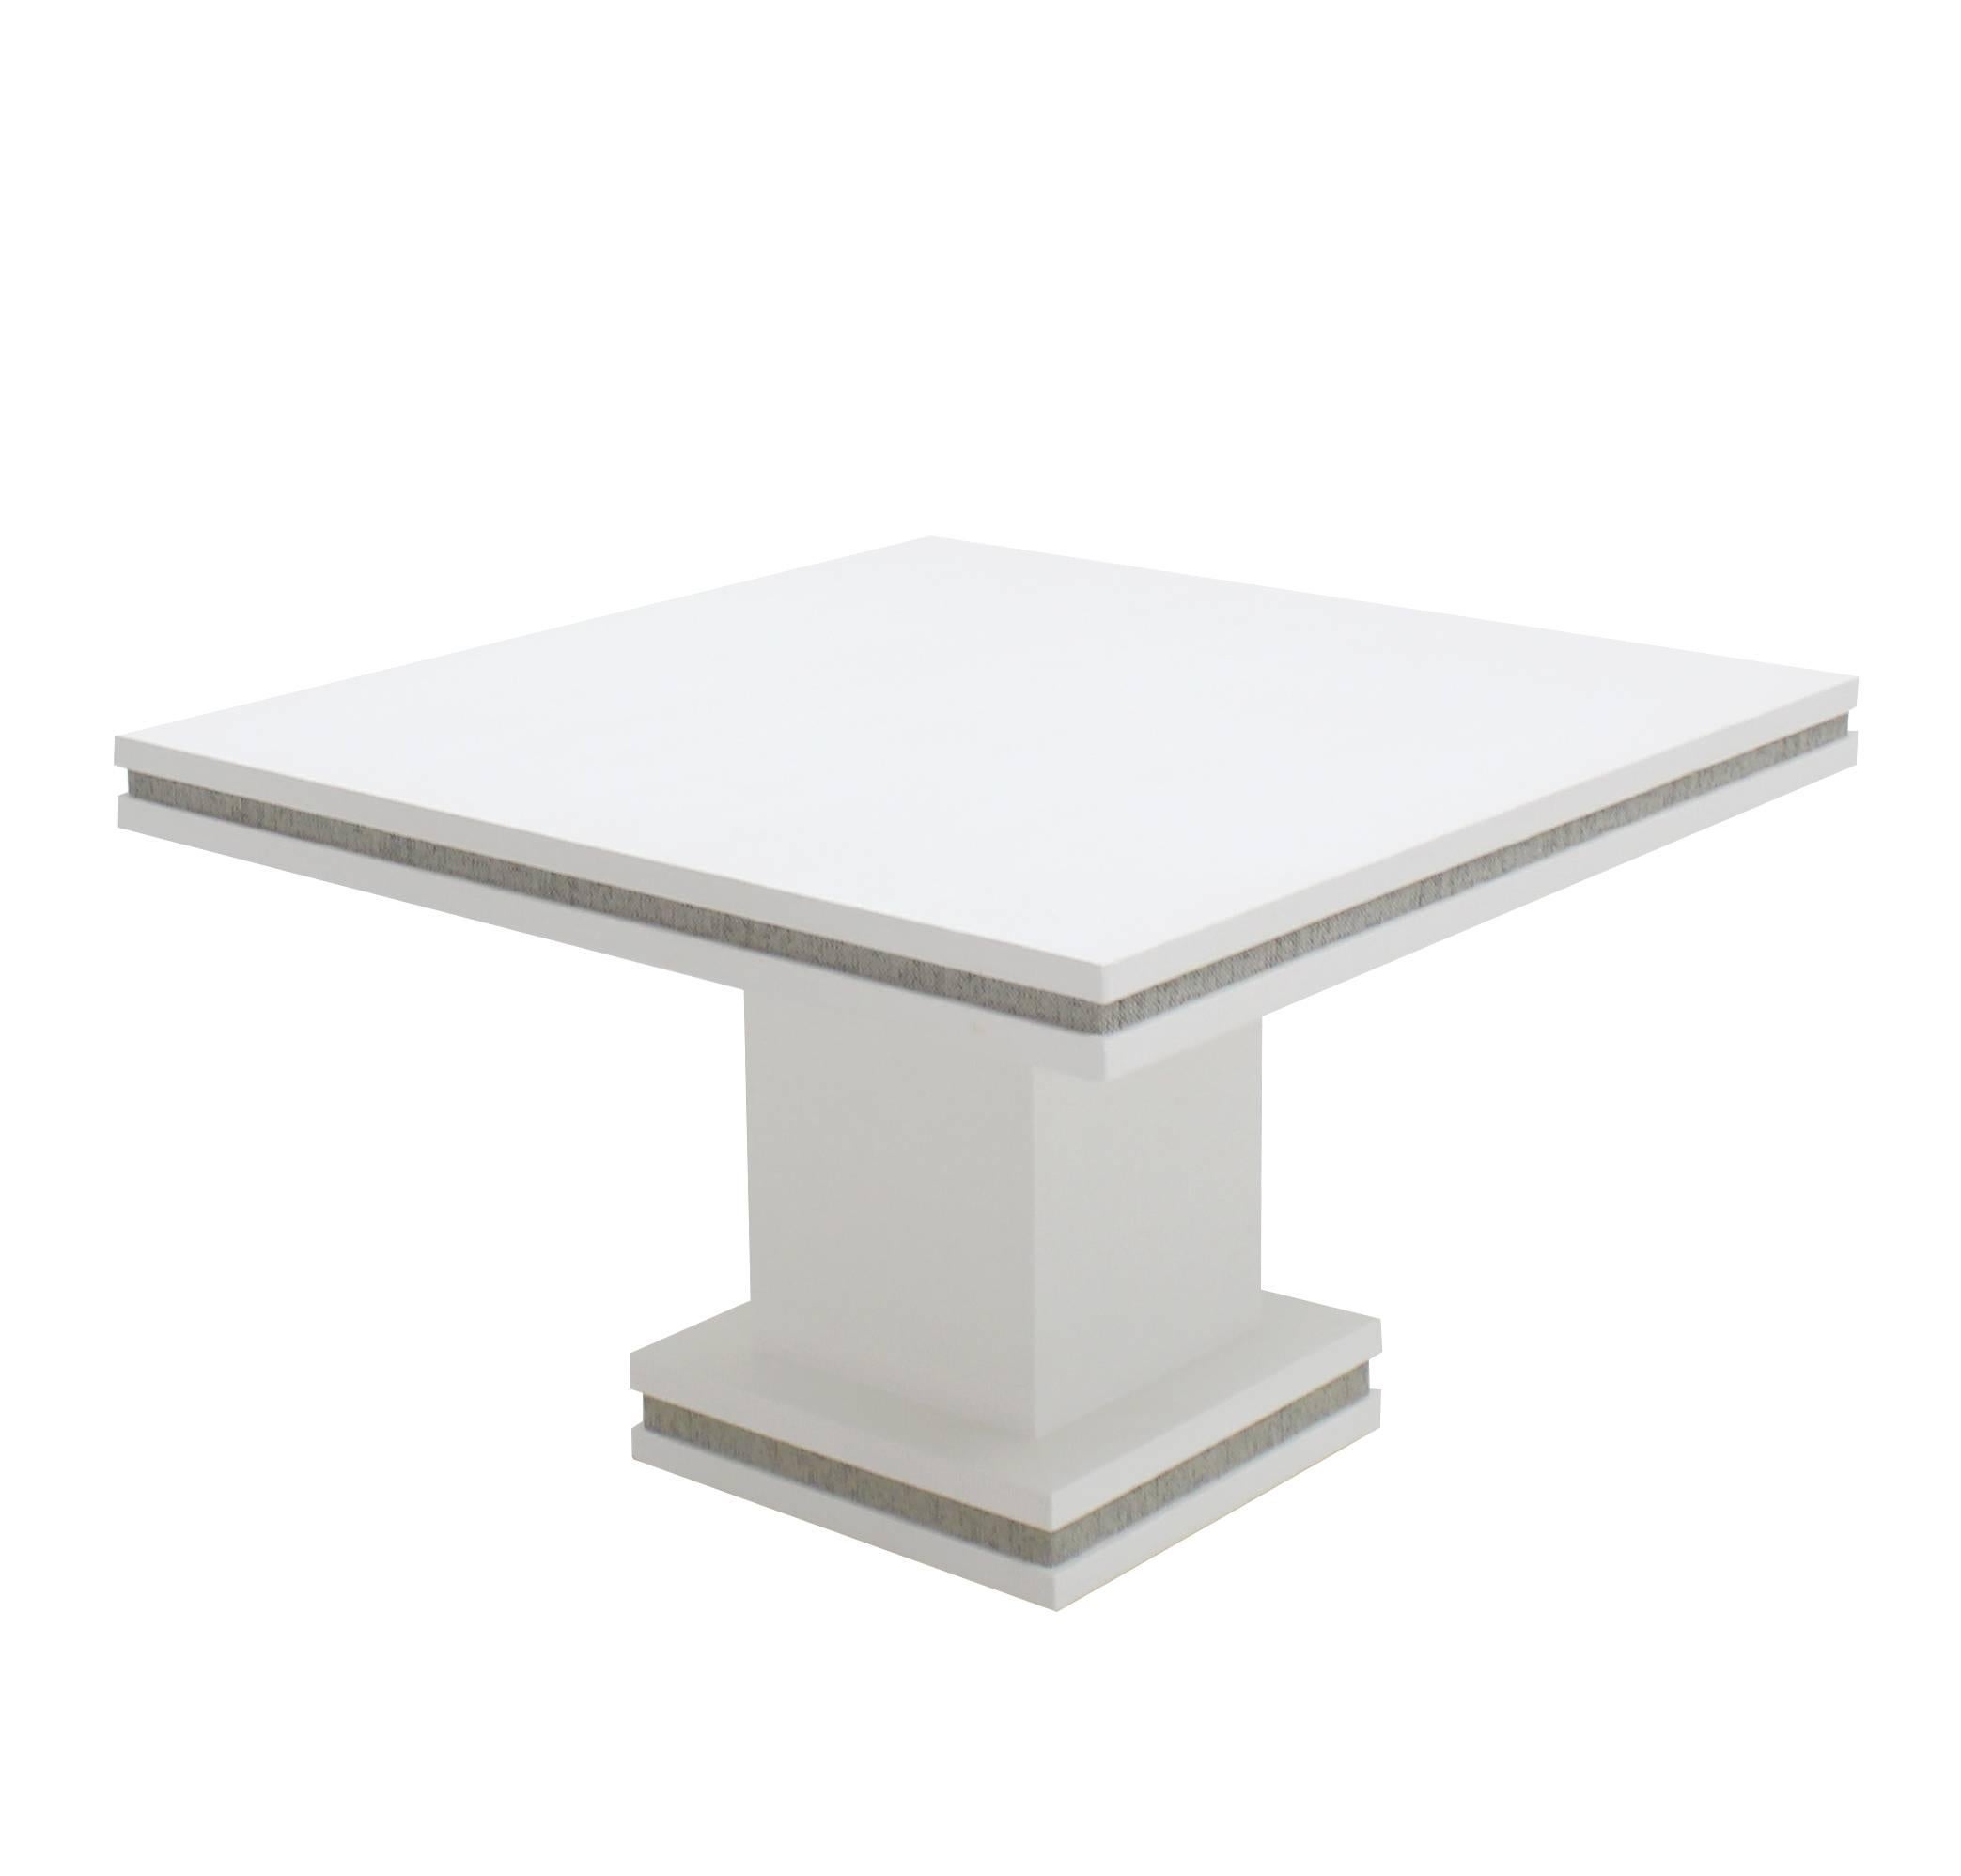 Large Square White Lacquer Cloth Finish Game Table